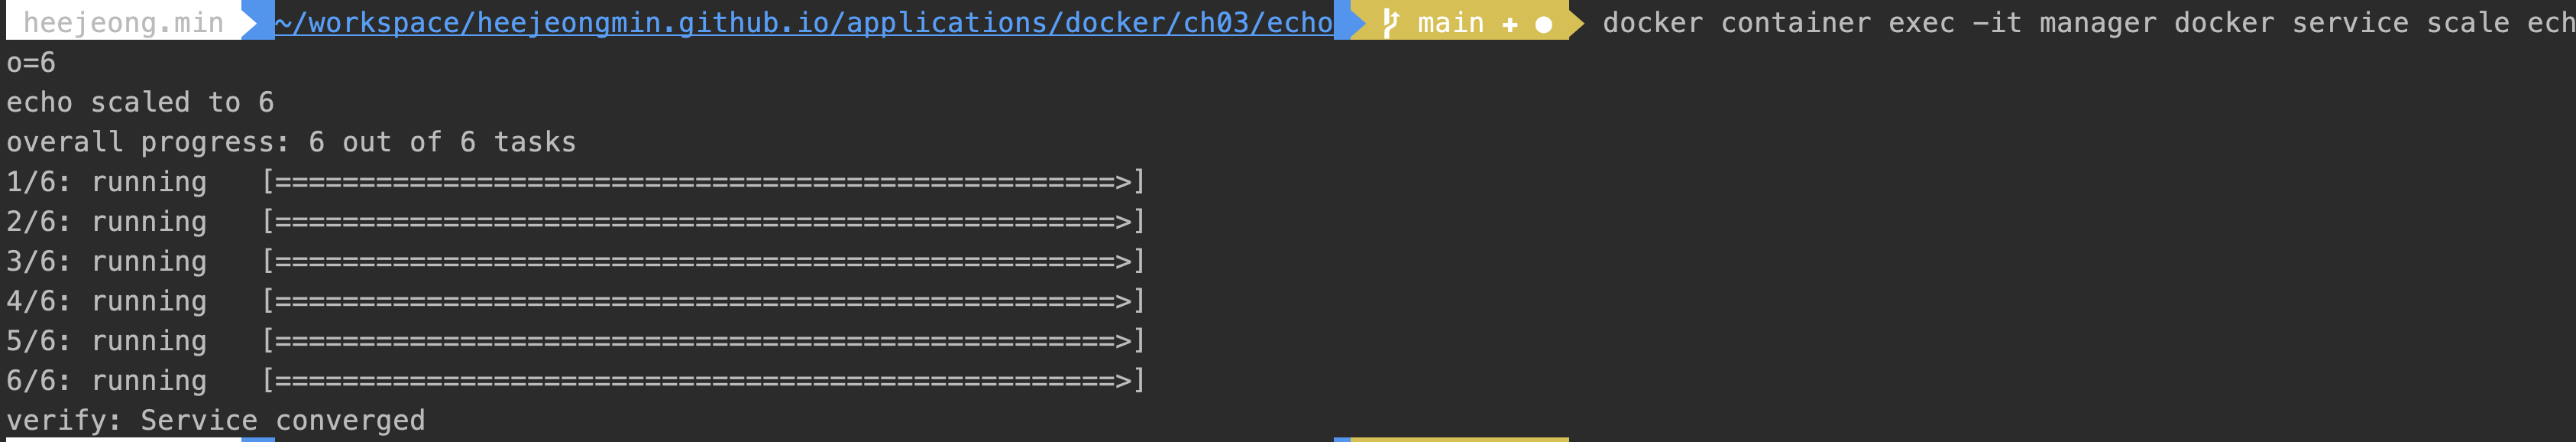 docker_service_scale_out.png